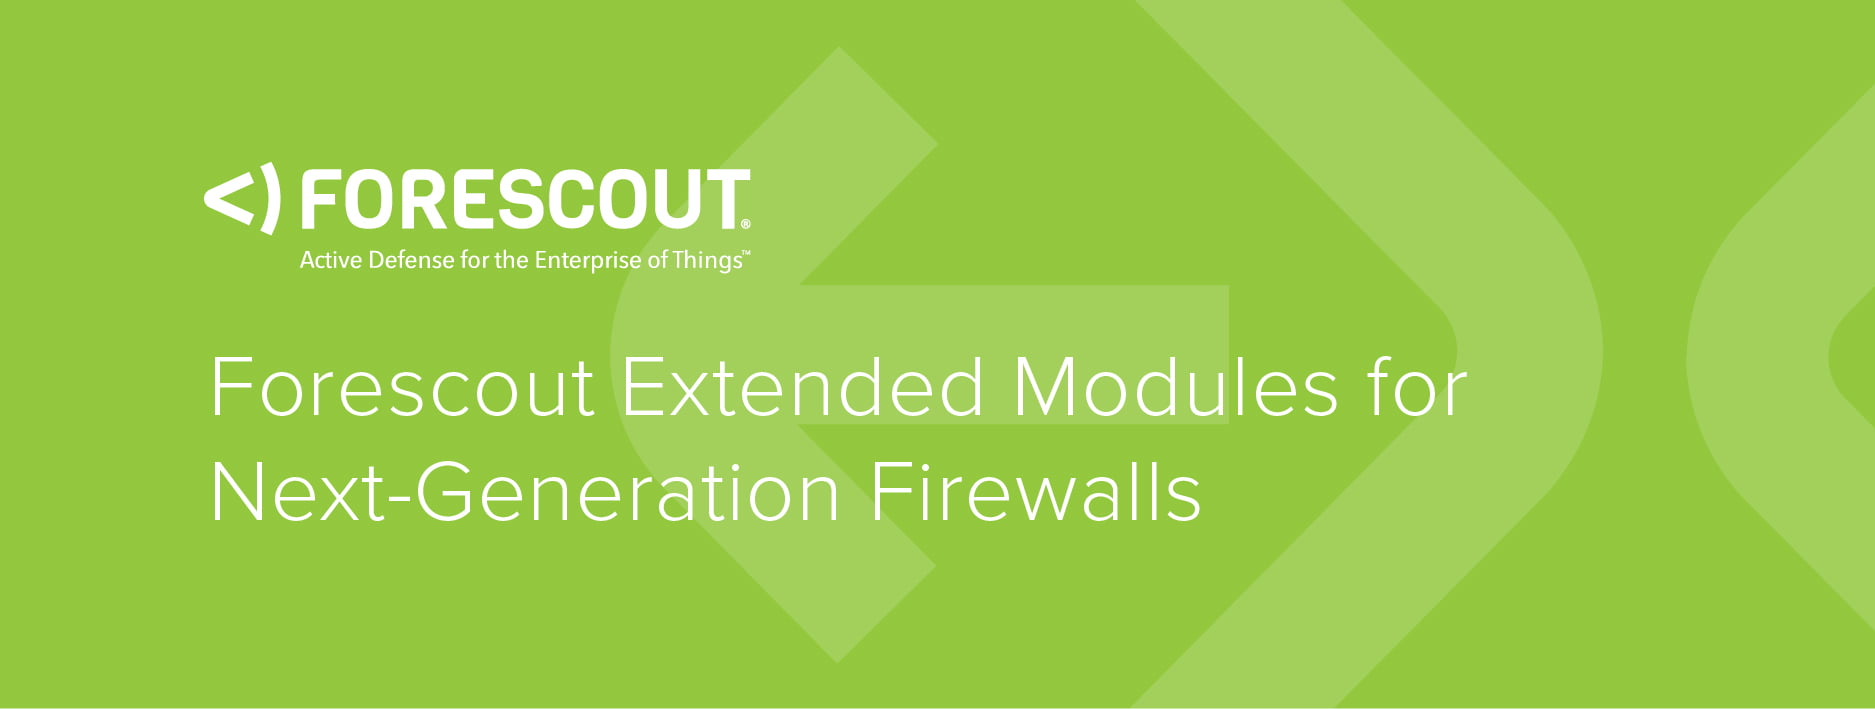 ForeScout Extended Modules for Next-Generation Firewalls - Exclusive ...